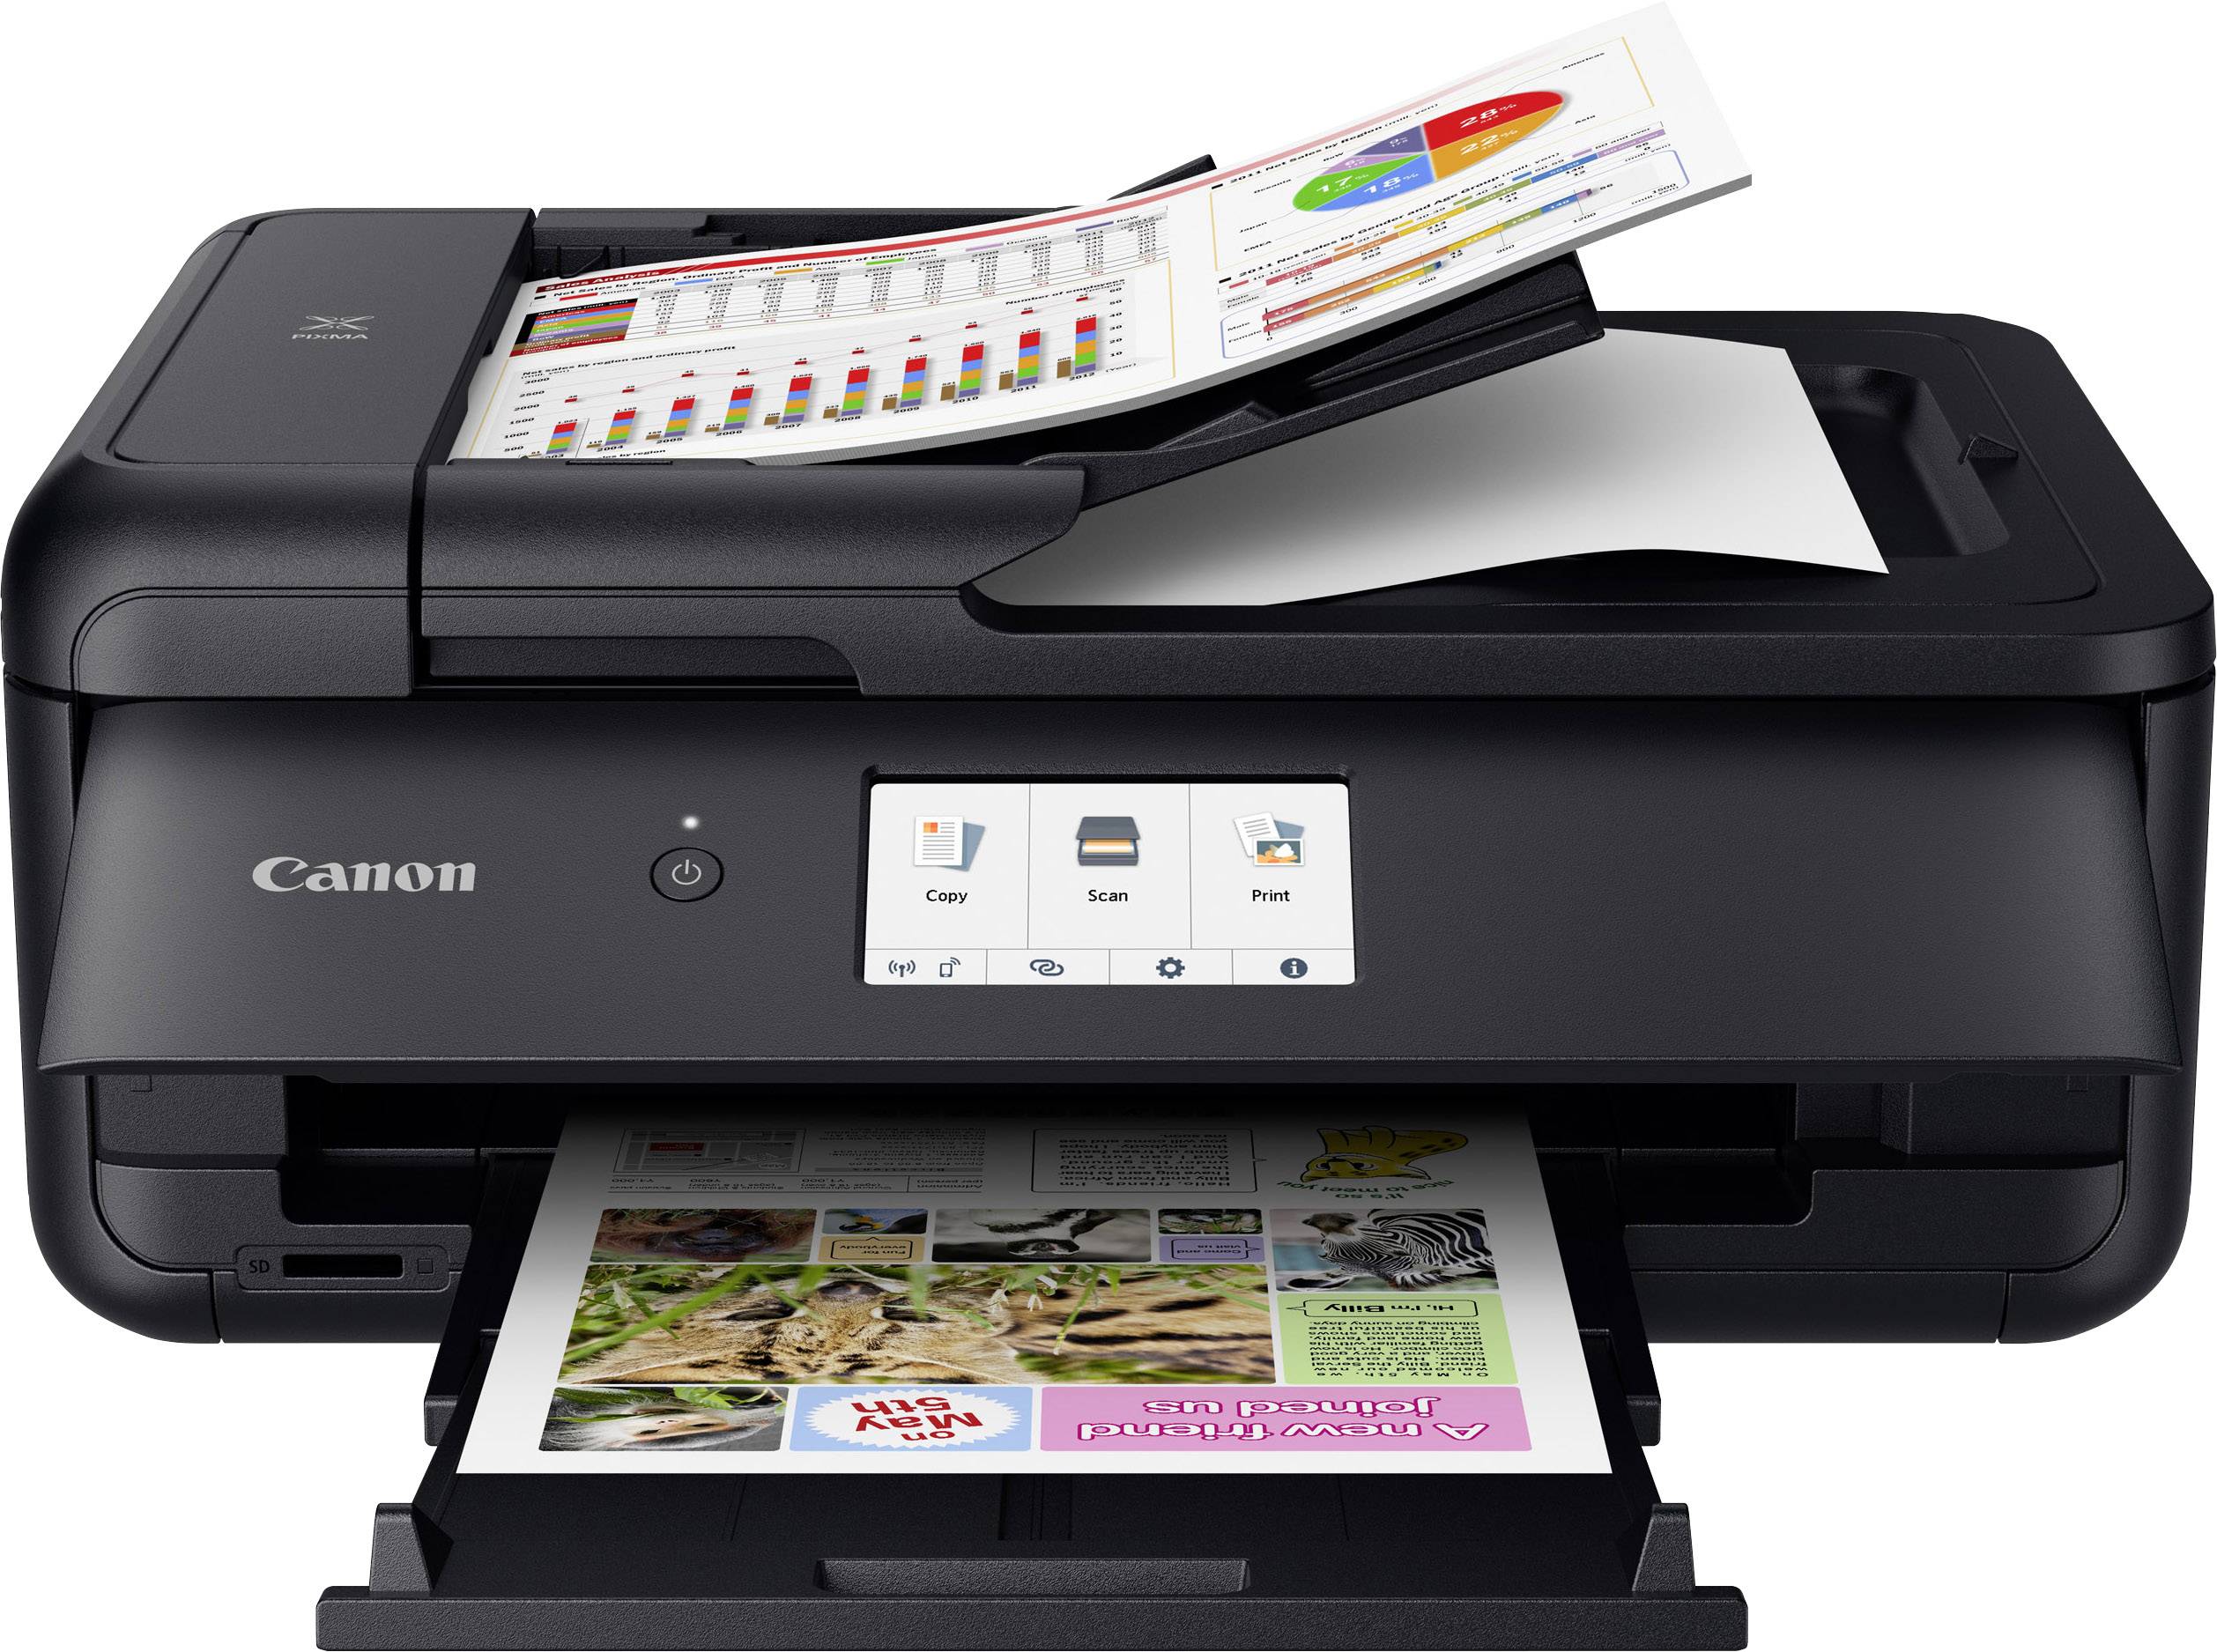 2023 Guide to Optimizing Print Quality Tips for Canon Printer Users